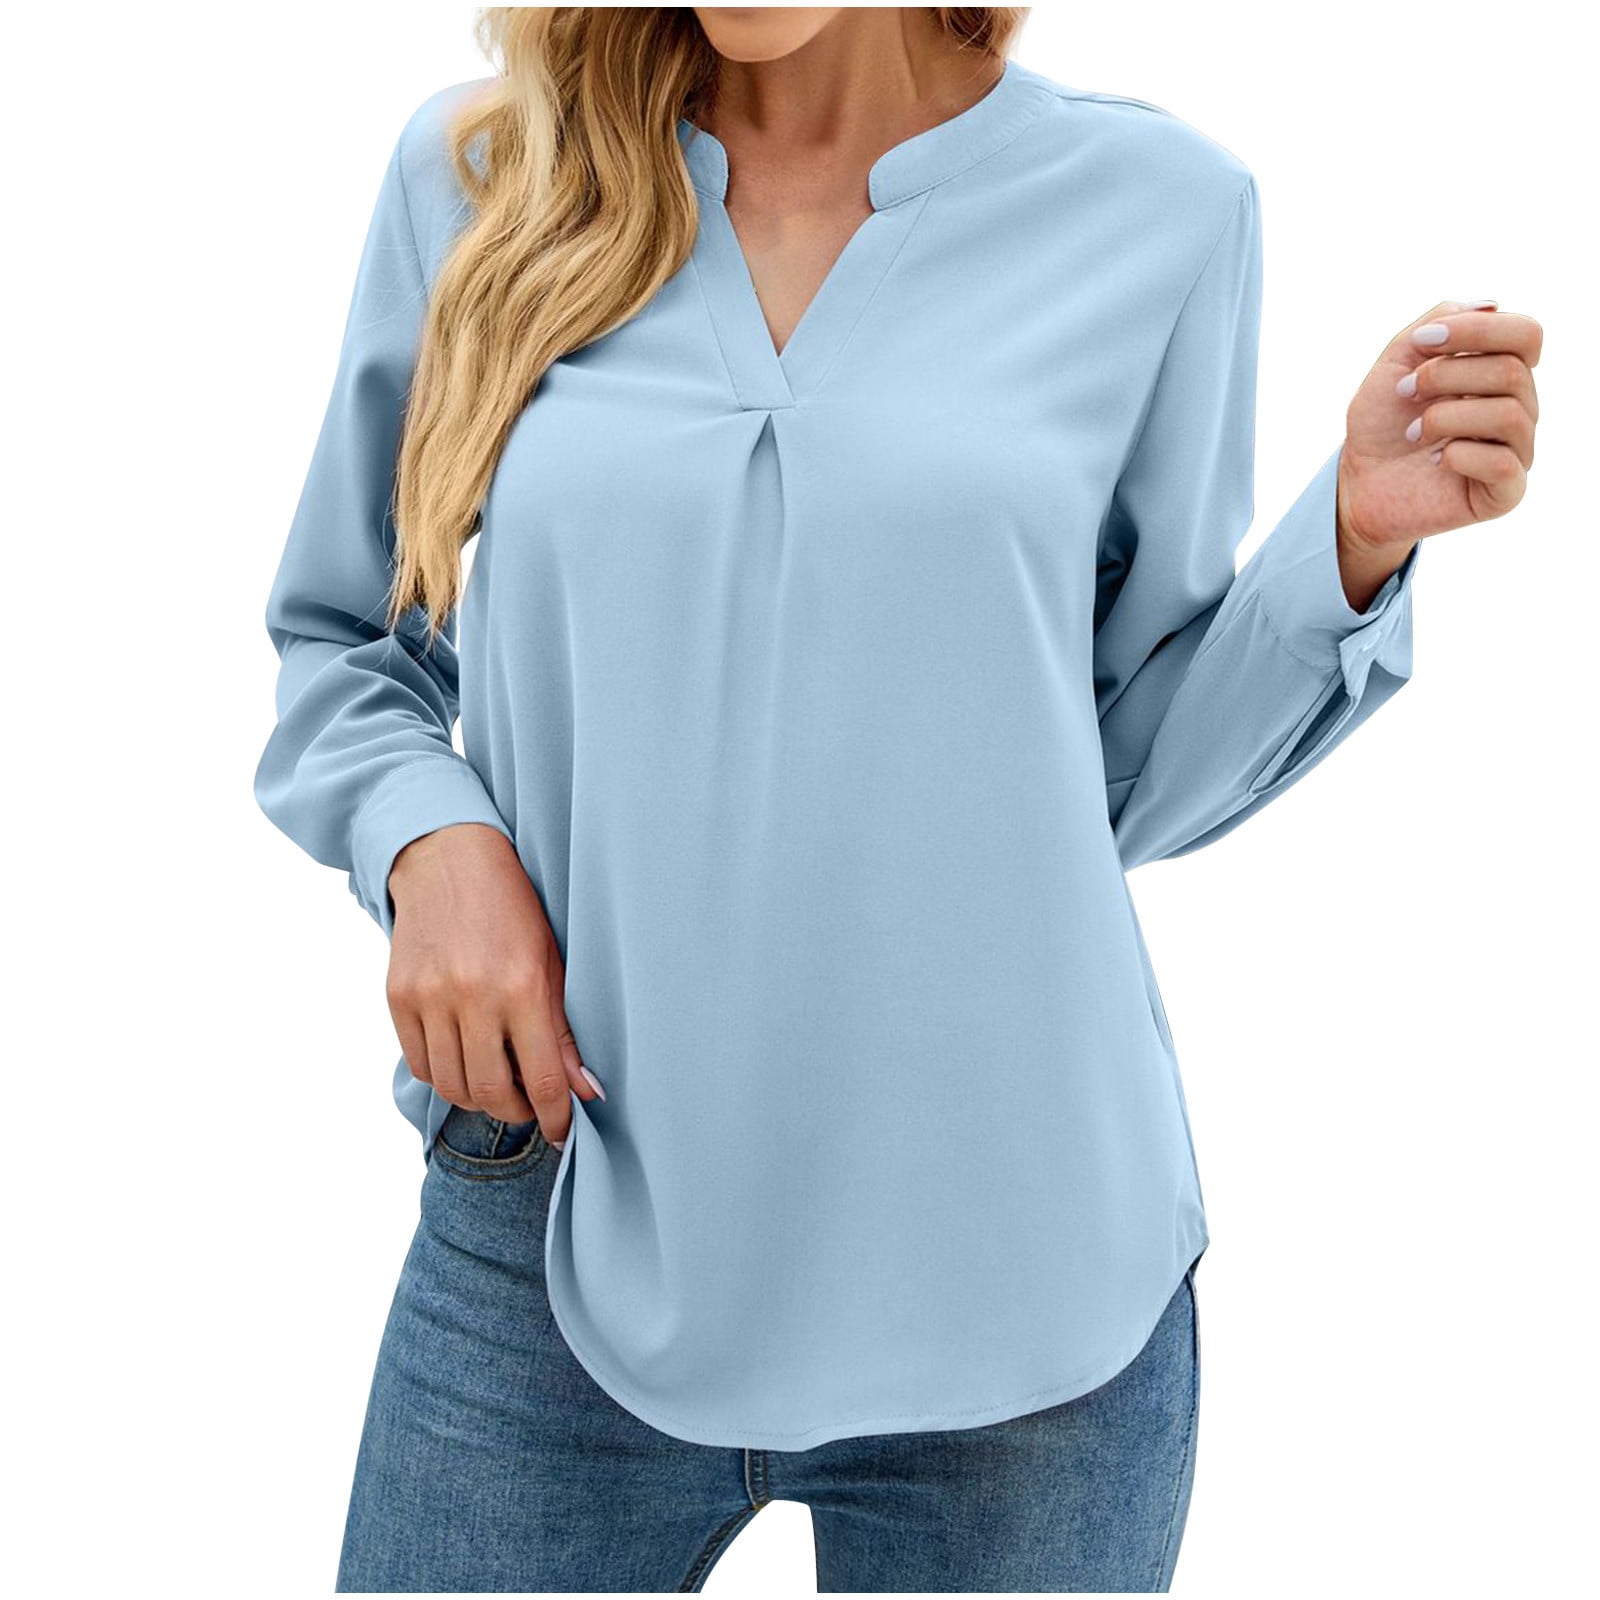 Hsmqhjwe Overstock Items Clearance All Women's Tops and Blouses Women's Fashion V Neck Button Top Blouses Print Swing Get Long Sleeve Fashion Blouse